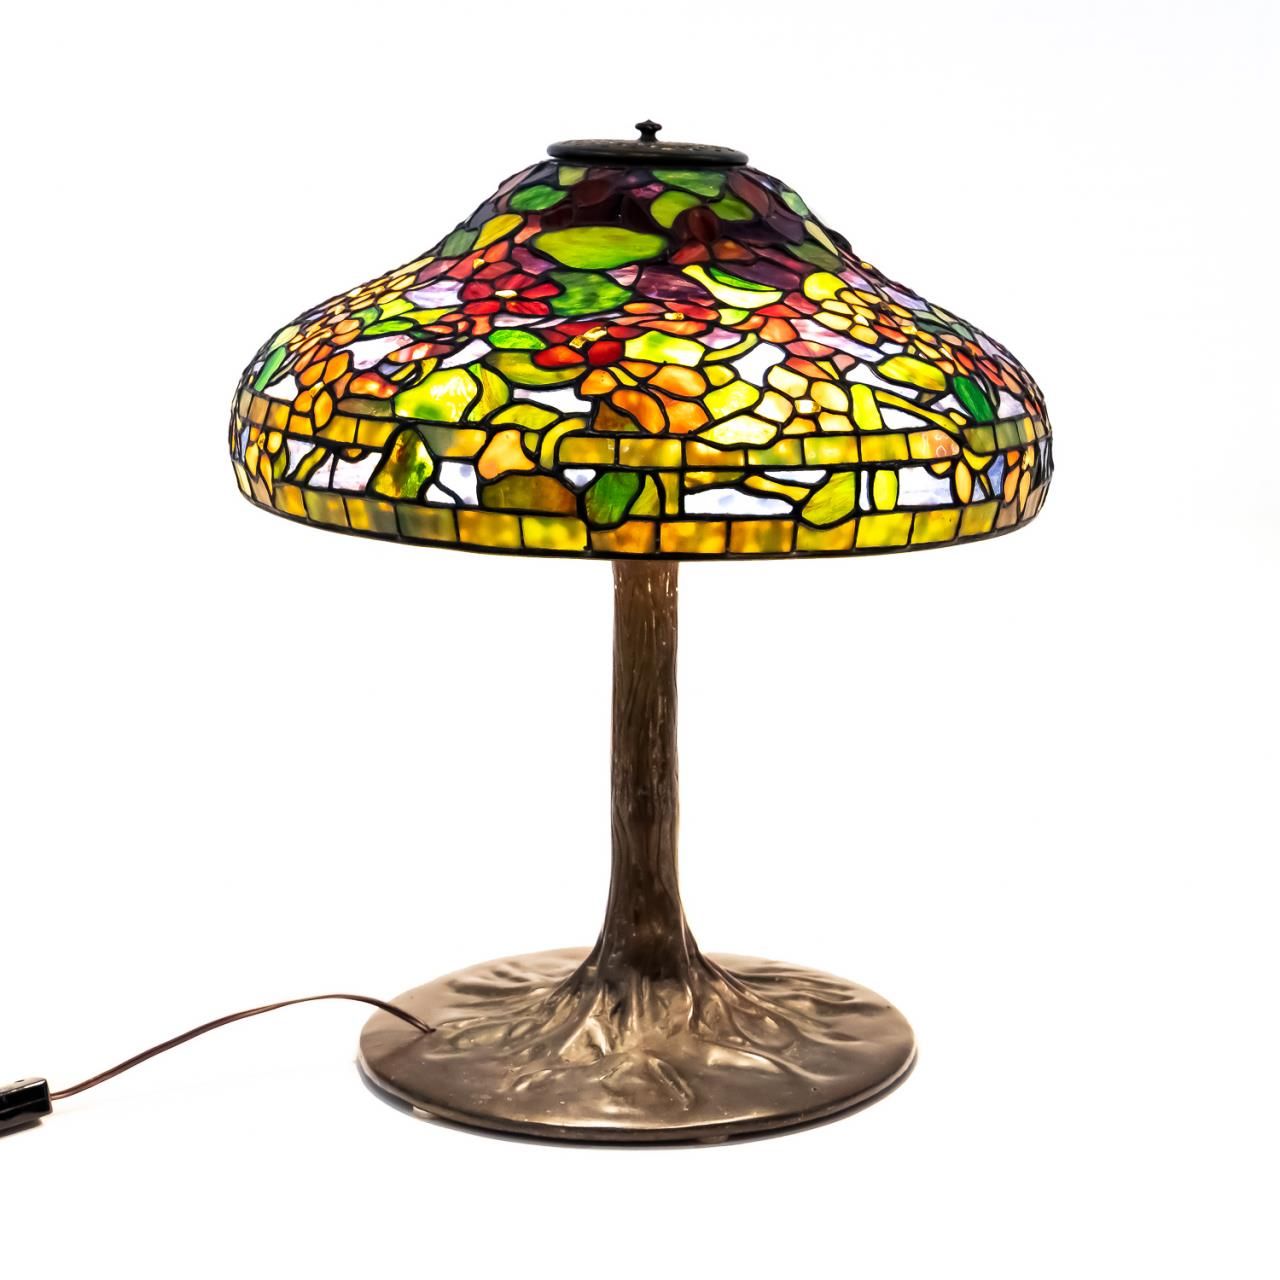 TIFFANY STYLE STAINED GLASS TABLE 35dd23